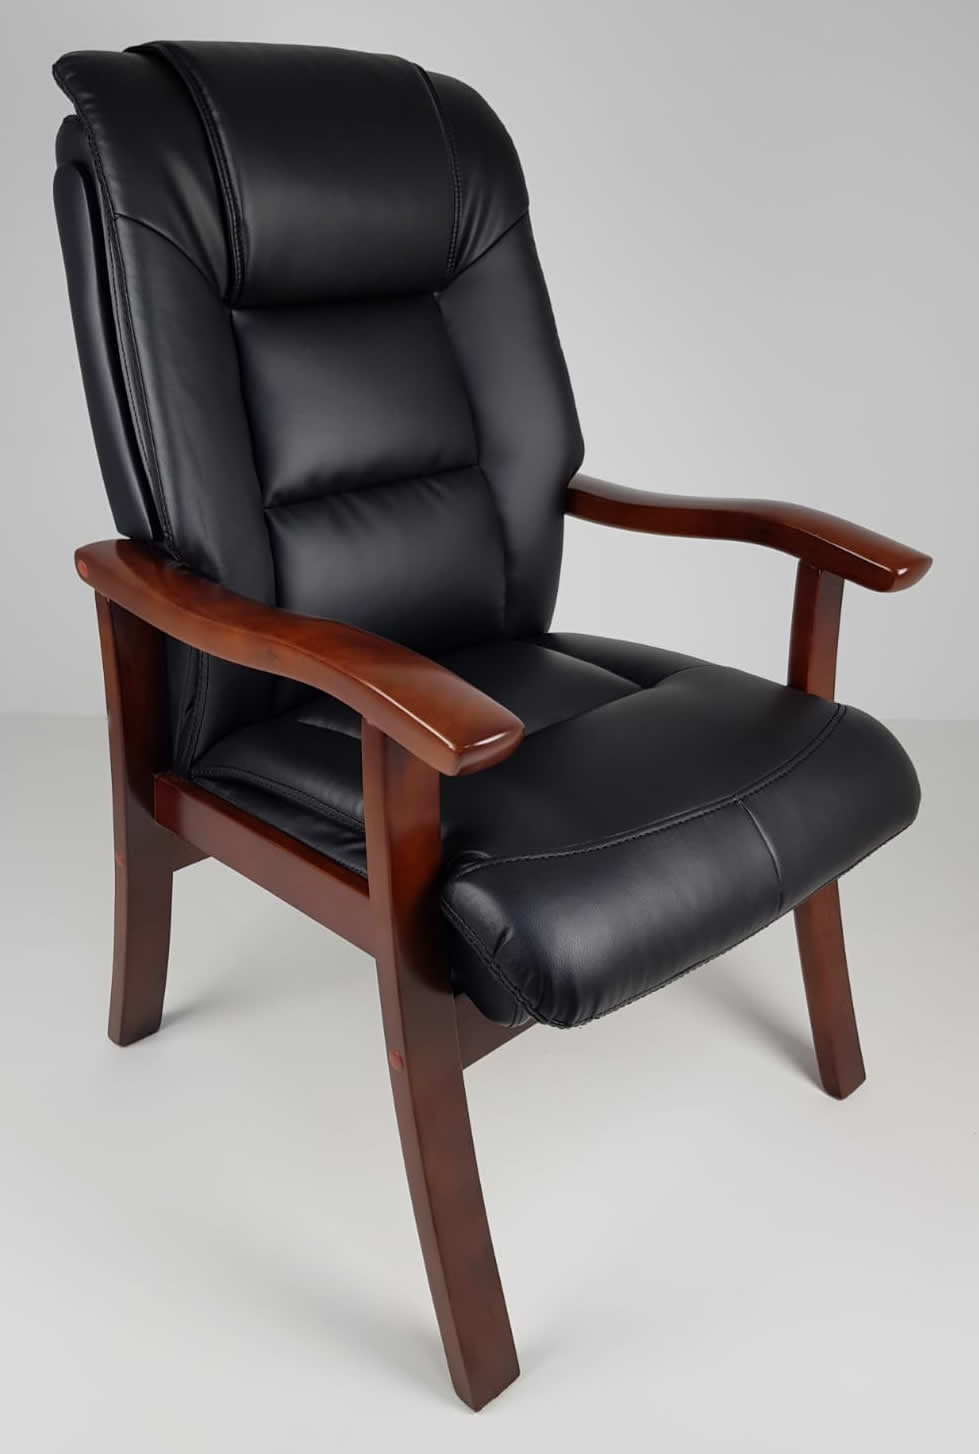 Visitor Chair Black Leather with Walnut Arms - CHA-1830C UK